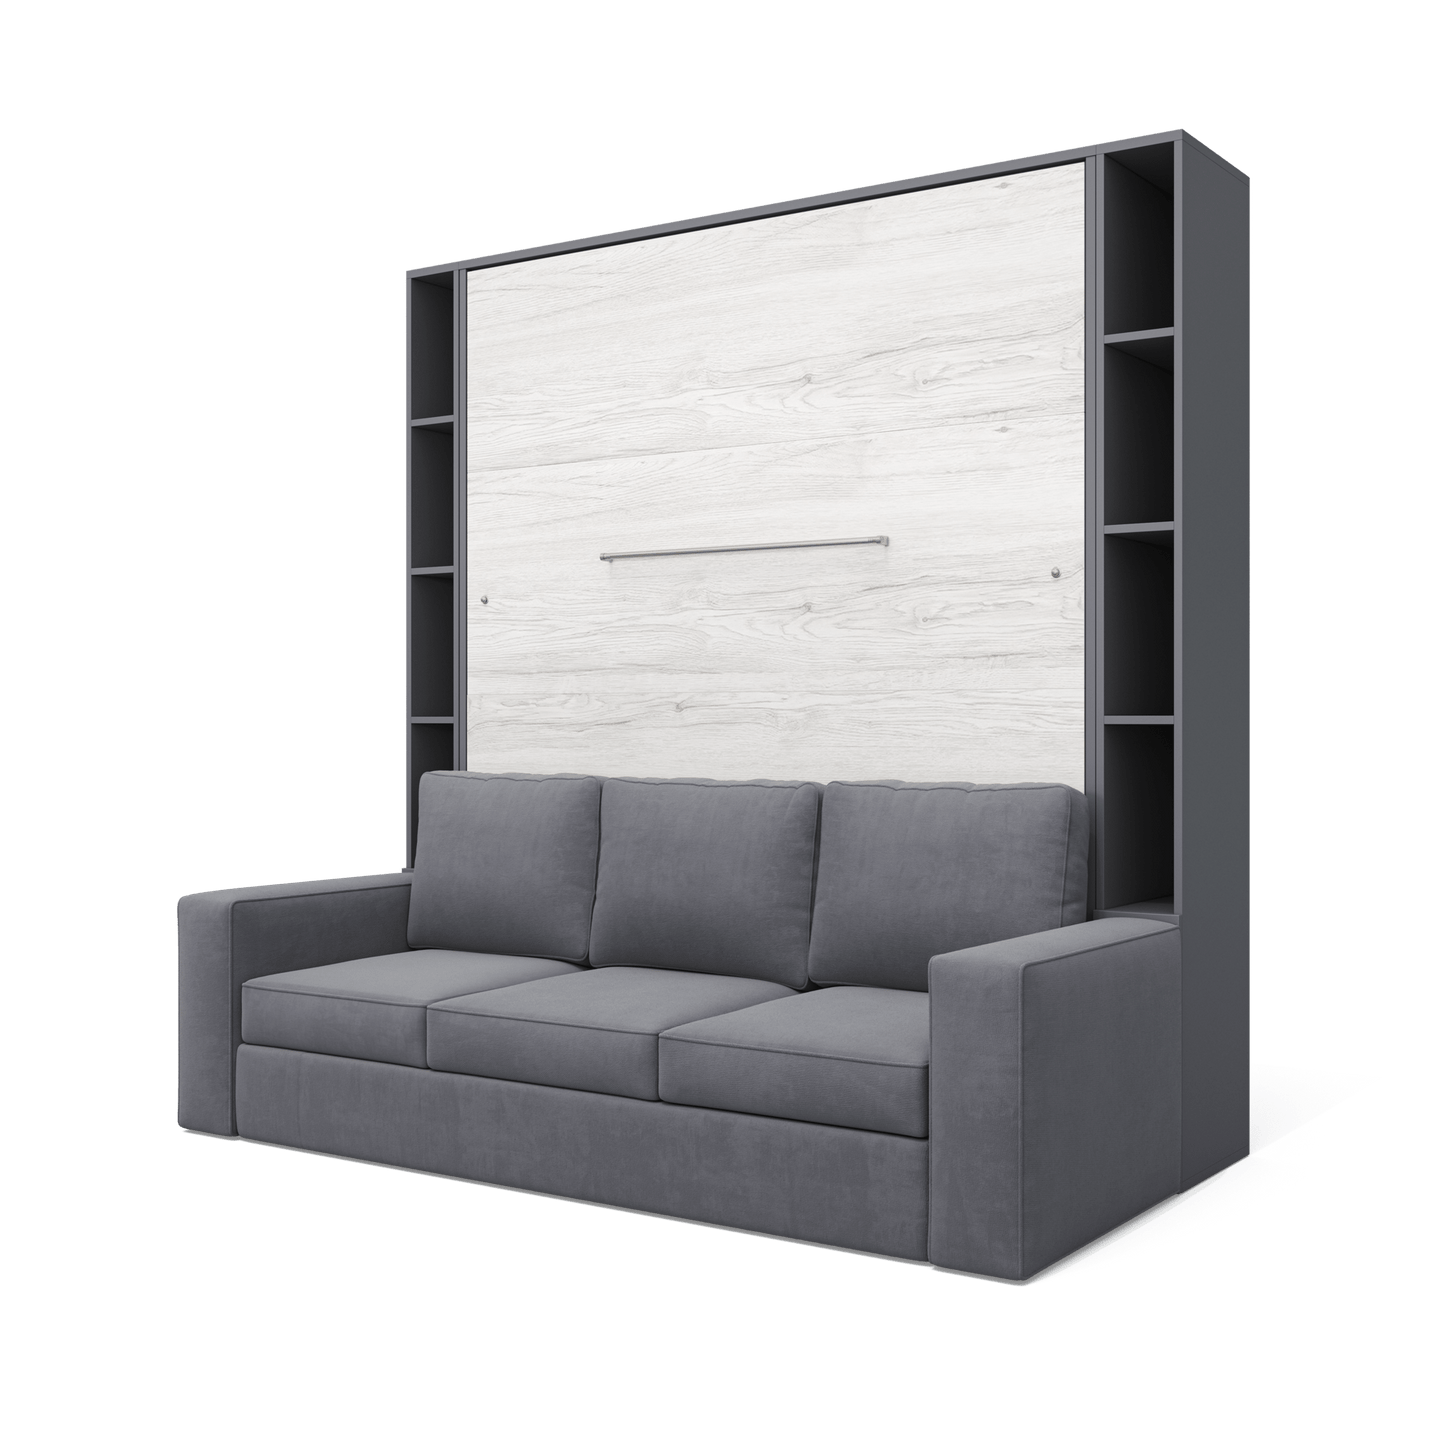 Maxima House Maxima House Vertical European Queen size Murphy Bed Invento with a Sofa and two Cabinets Grey/White Monaco + Grey IN014/23GW-G